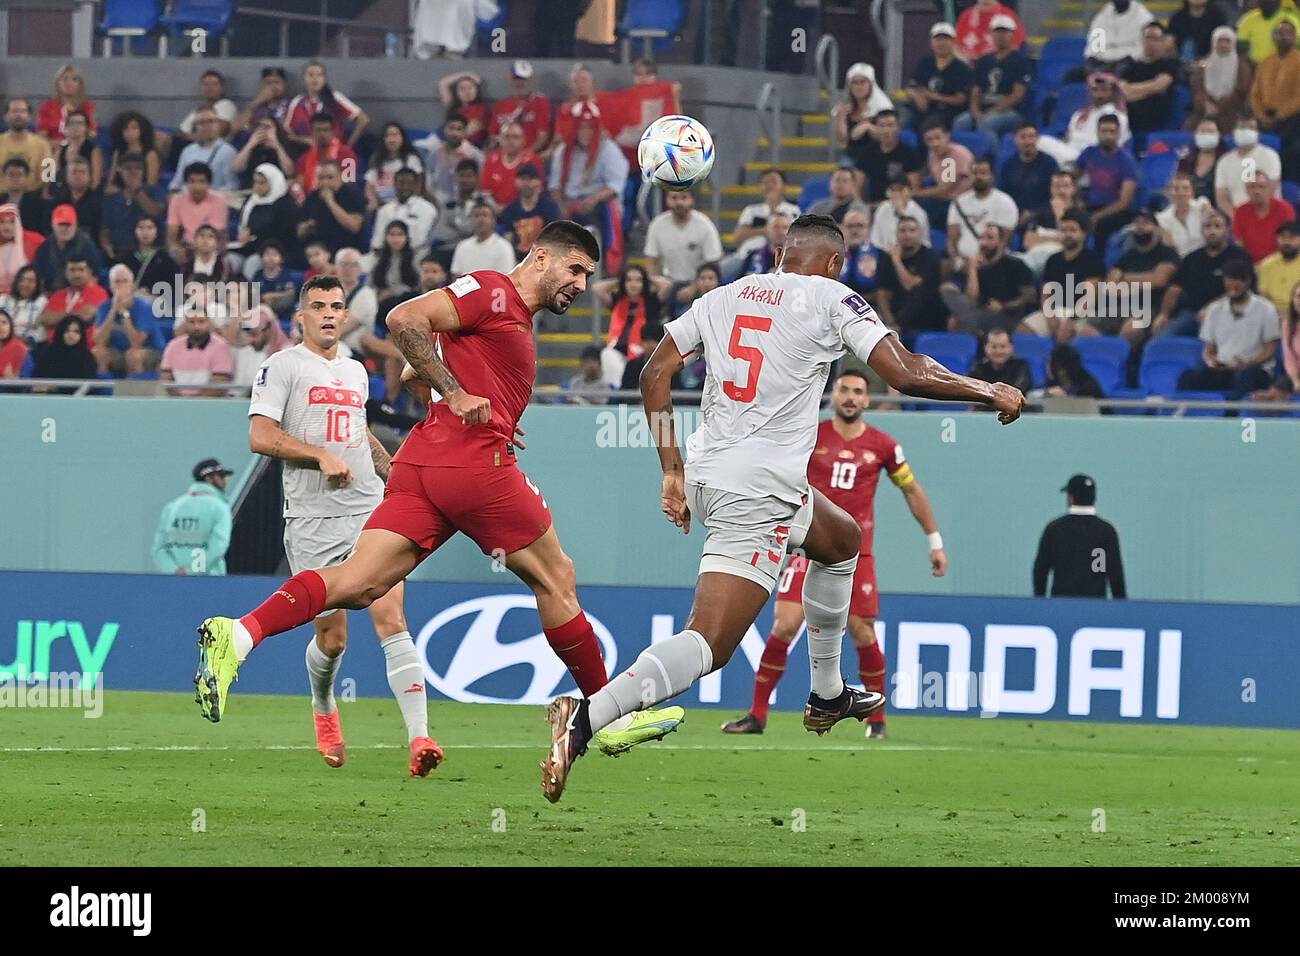 goal 1-1 MITROVIC Aleksandar (SRB), header, action, duels versus Manuel AKANJI (SUI), Serbia (SRB) - Switzerland (SUI) 2-3 group stage group G, game 47 on December 2nd, 2022, Stadium 974, Football World Championship 2022 in Qatar from 20.11. - 18.12.2022 ? Stock Photo